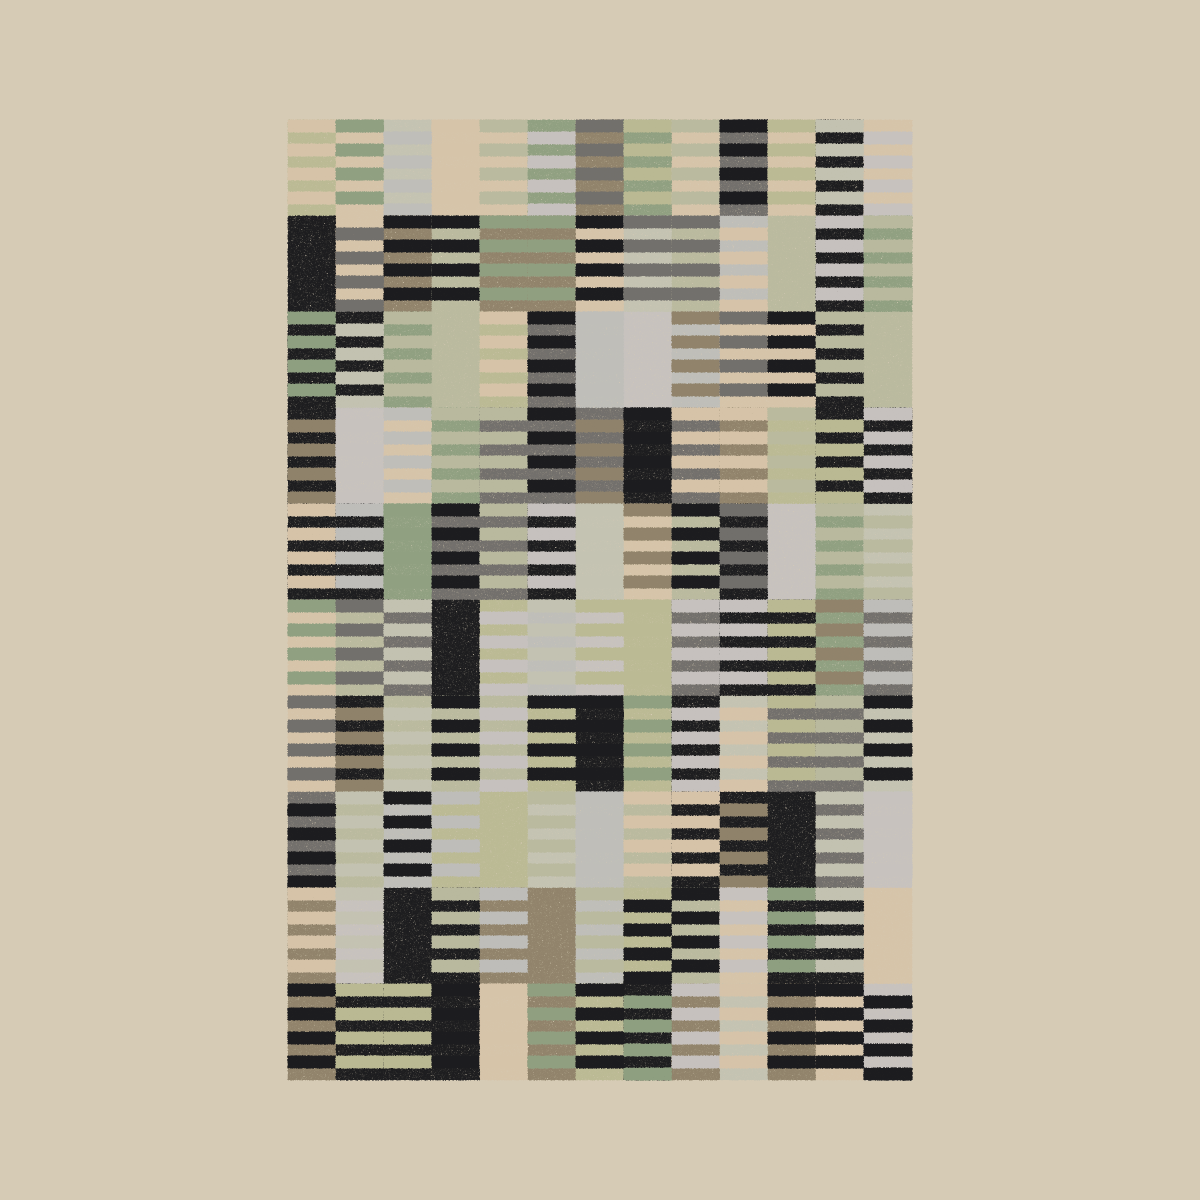 Day 11: In the style of Anni Albers